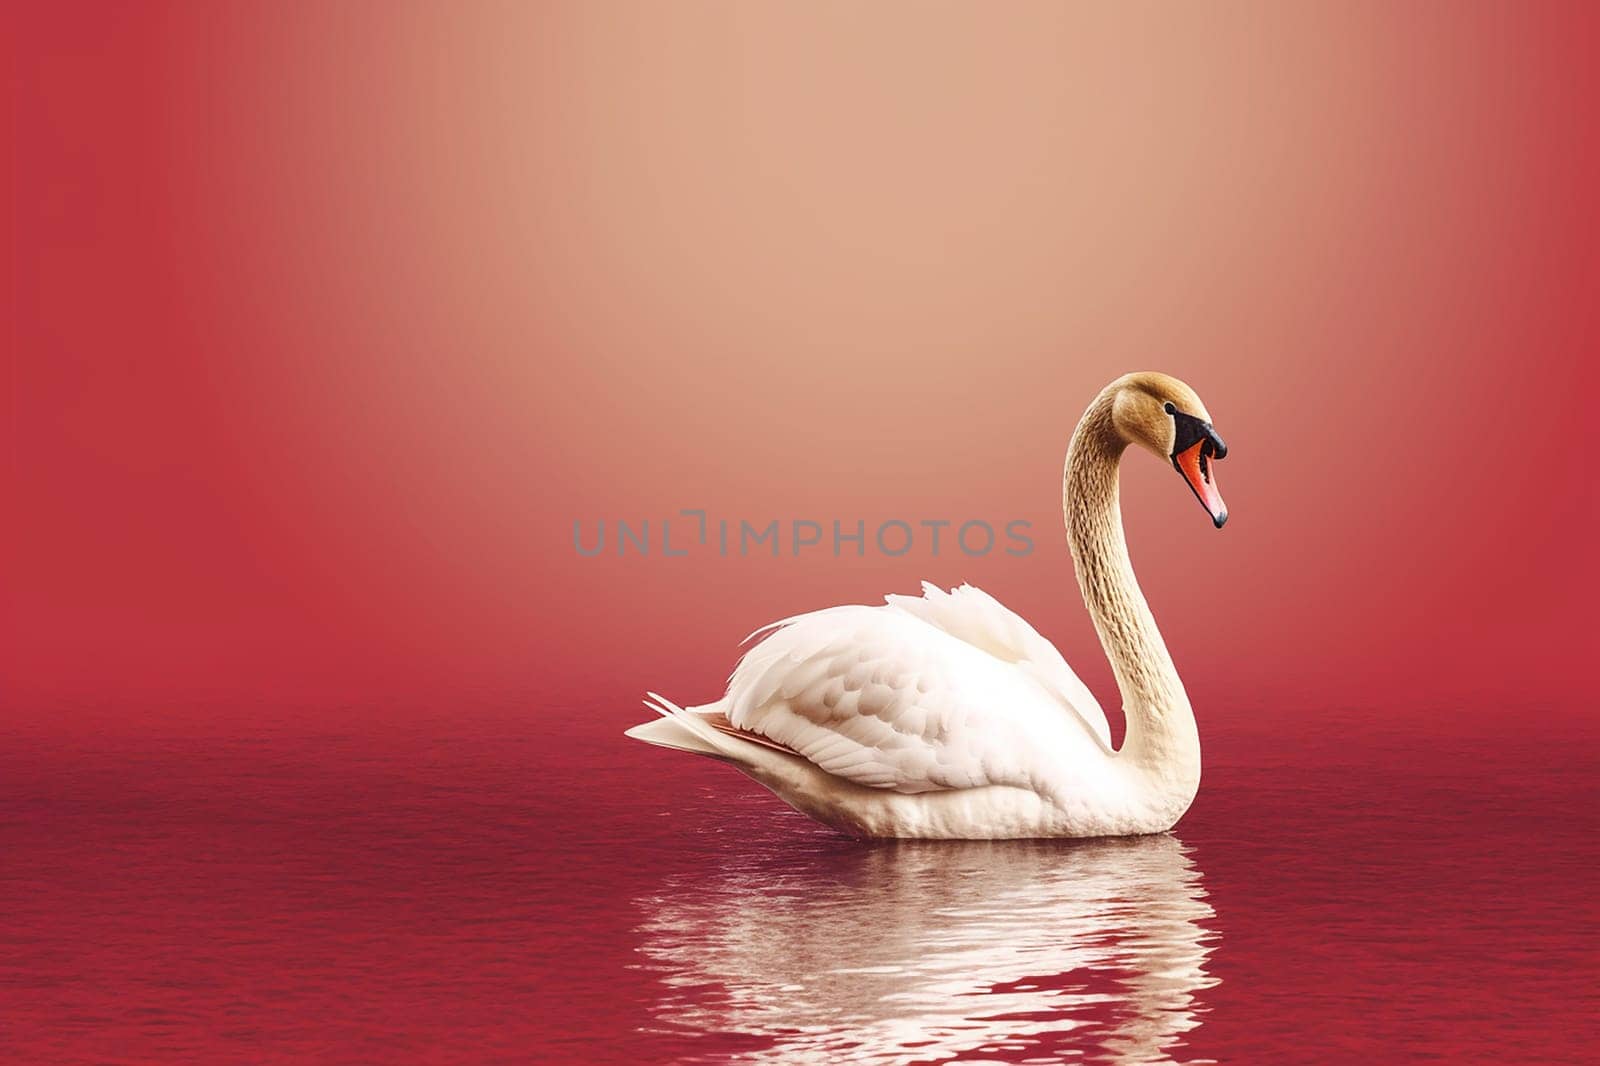 A serene swan glides gracefully on calm water with colored background by Hype2art